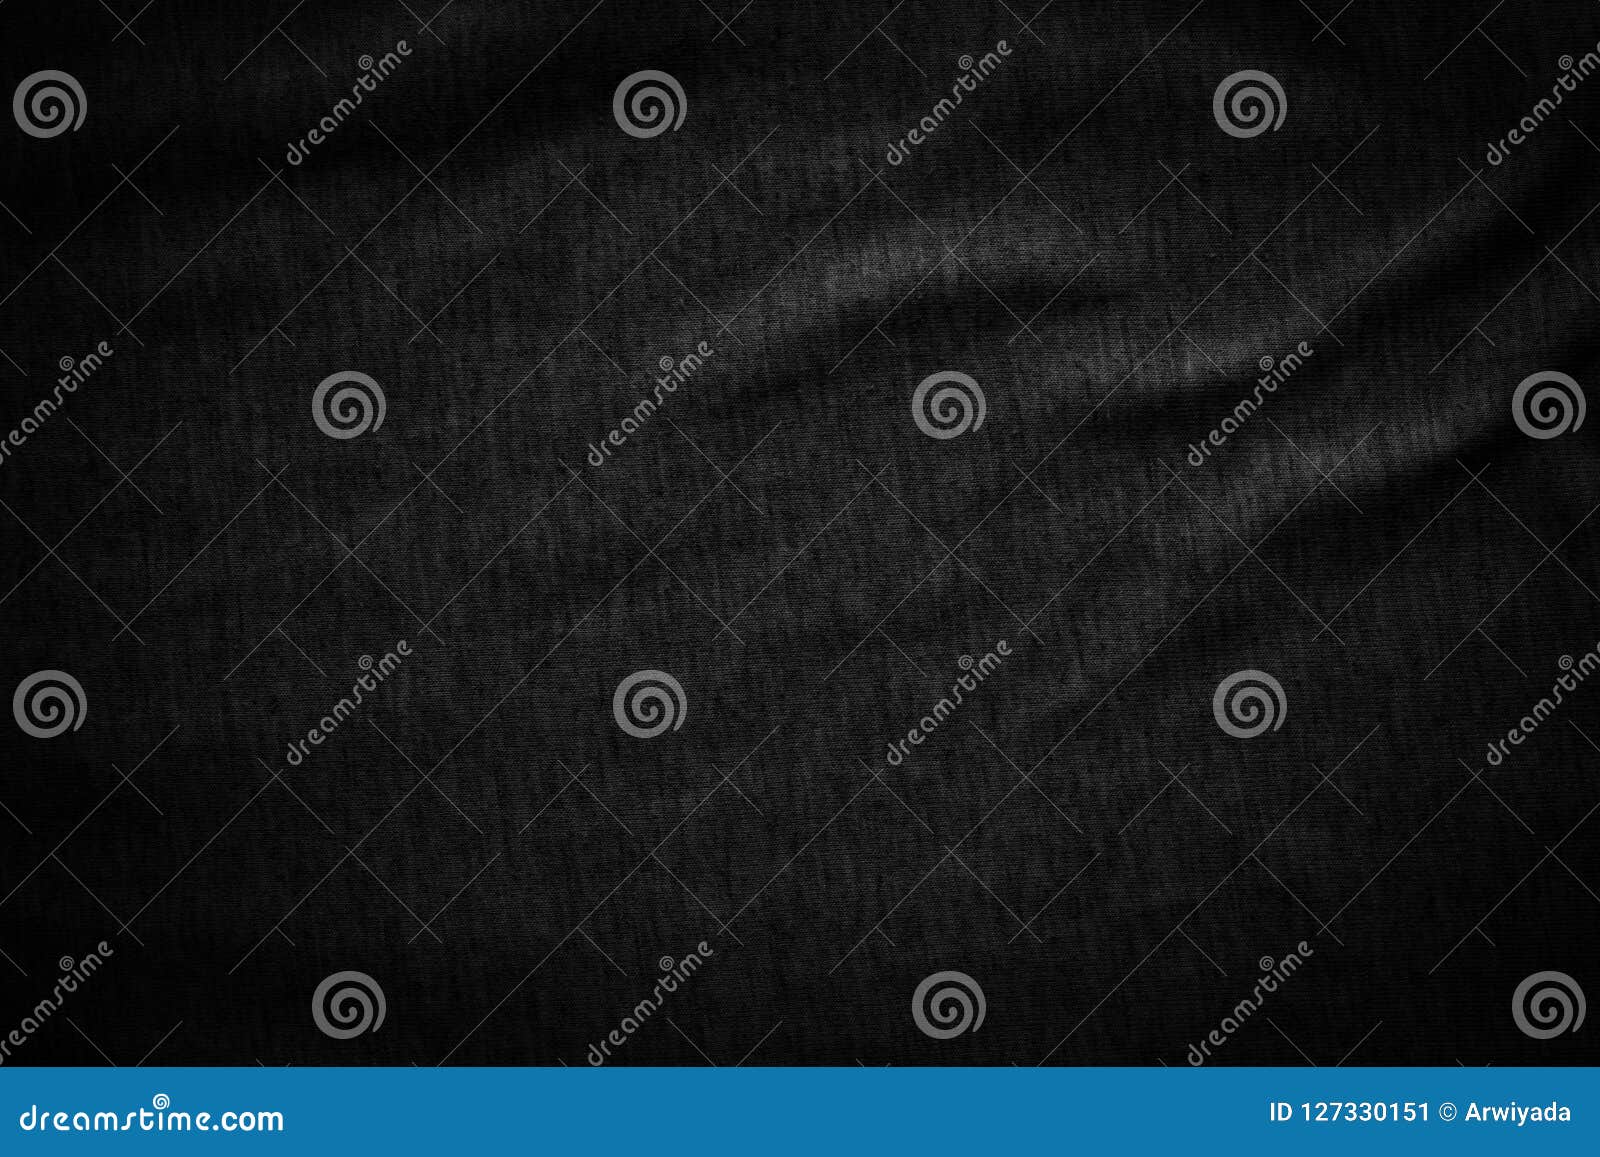 Dark Background with Bright Abstract Cloth Texture Fabric. Stock Image ...